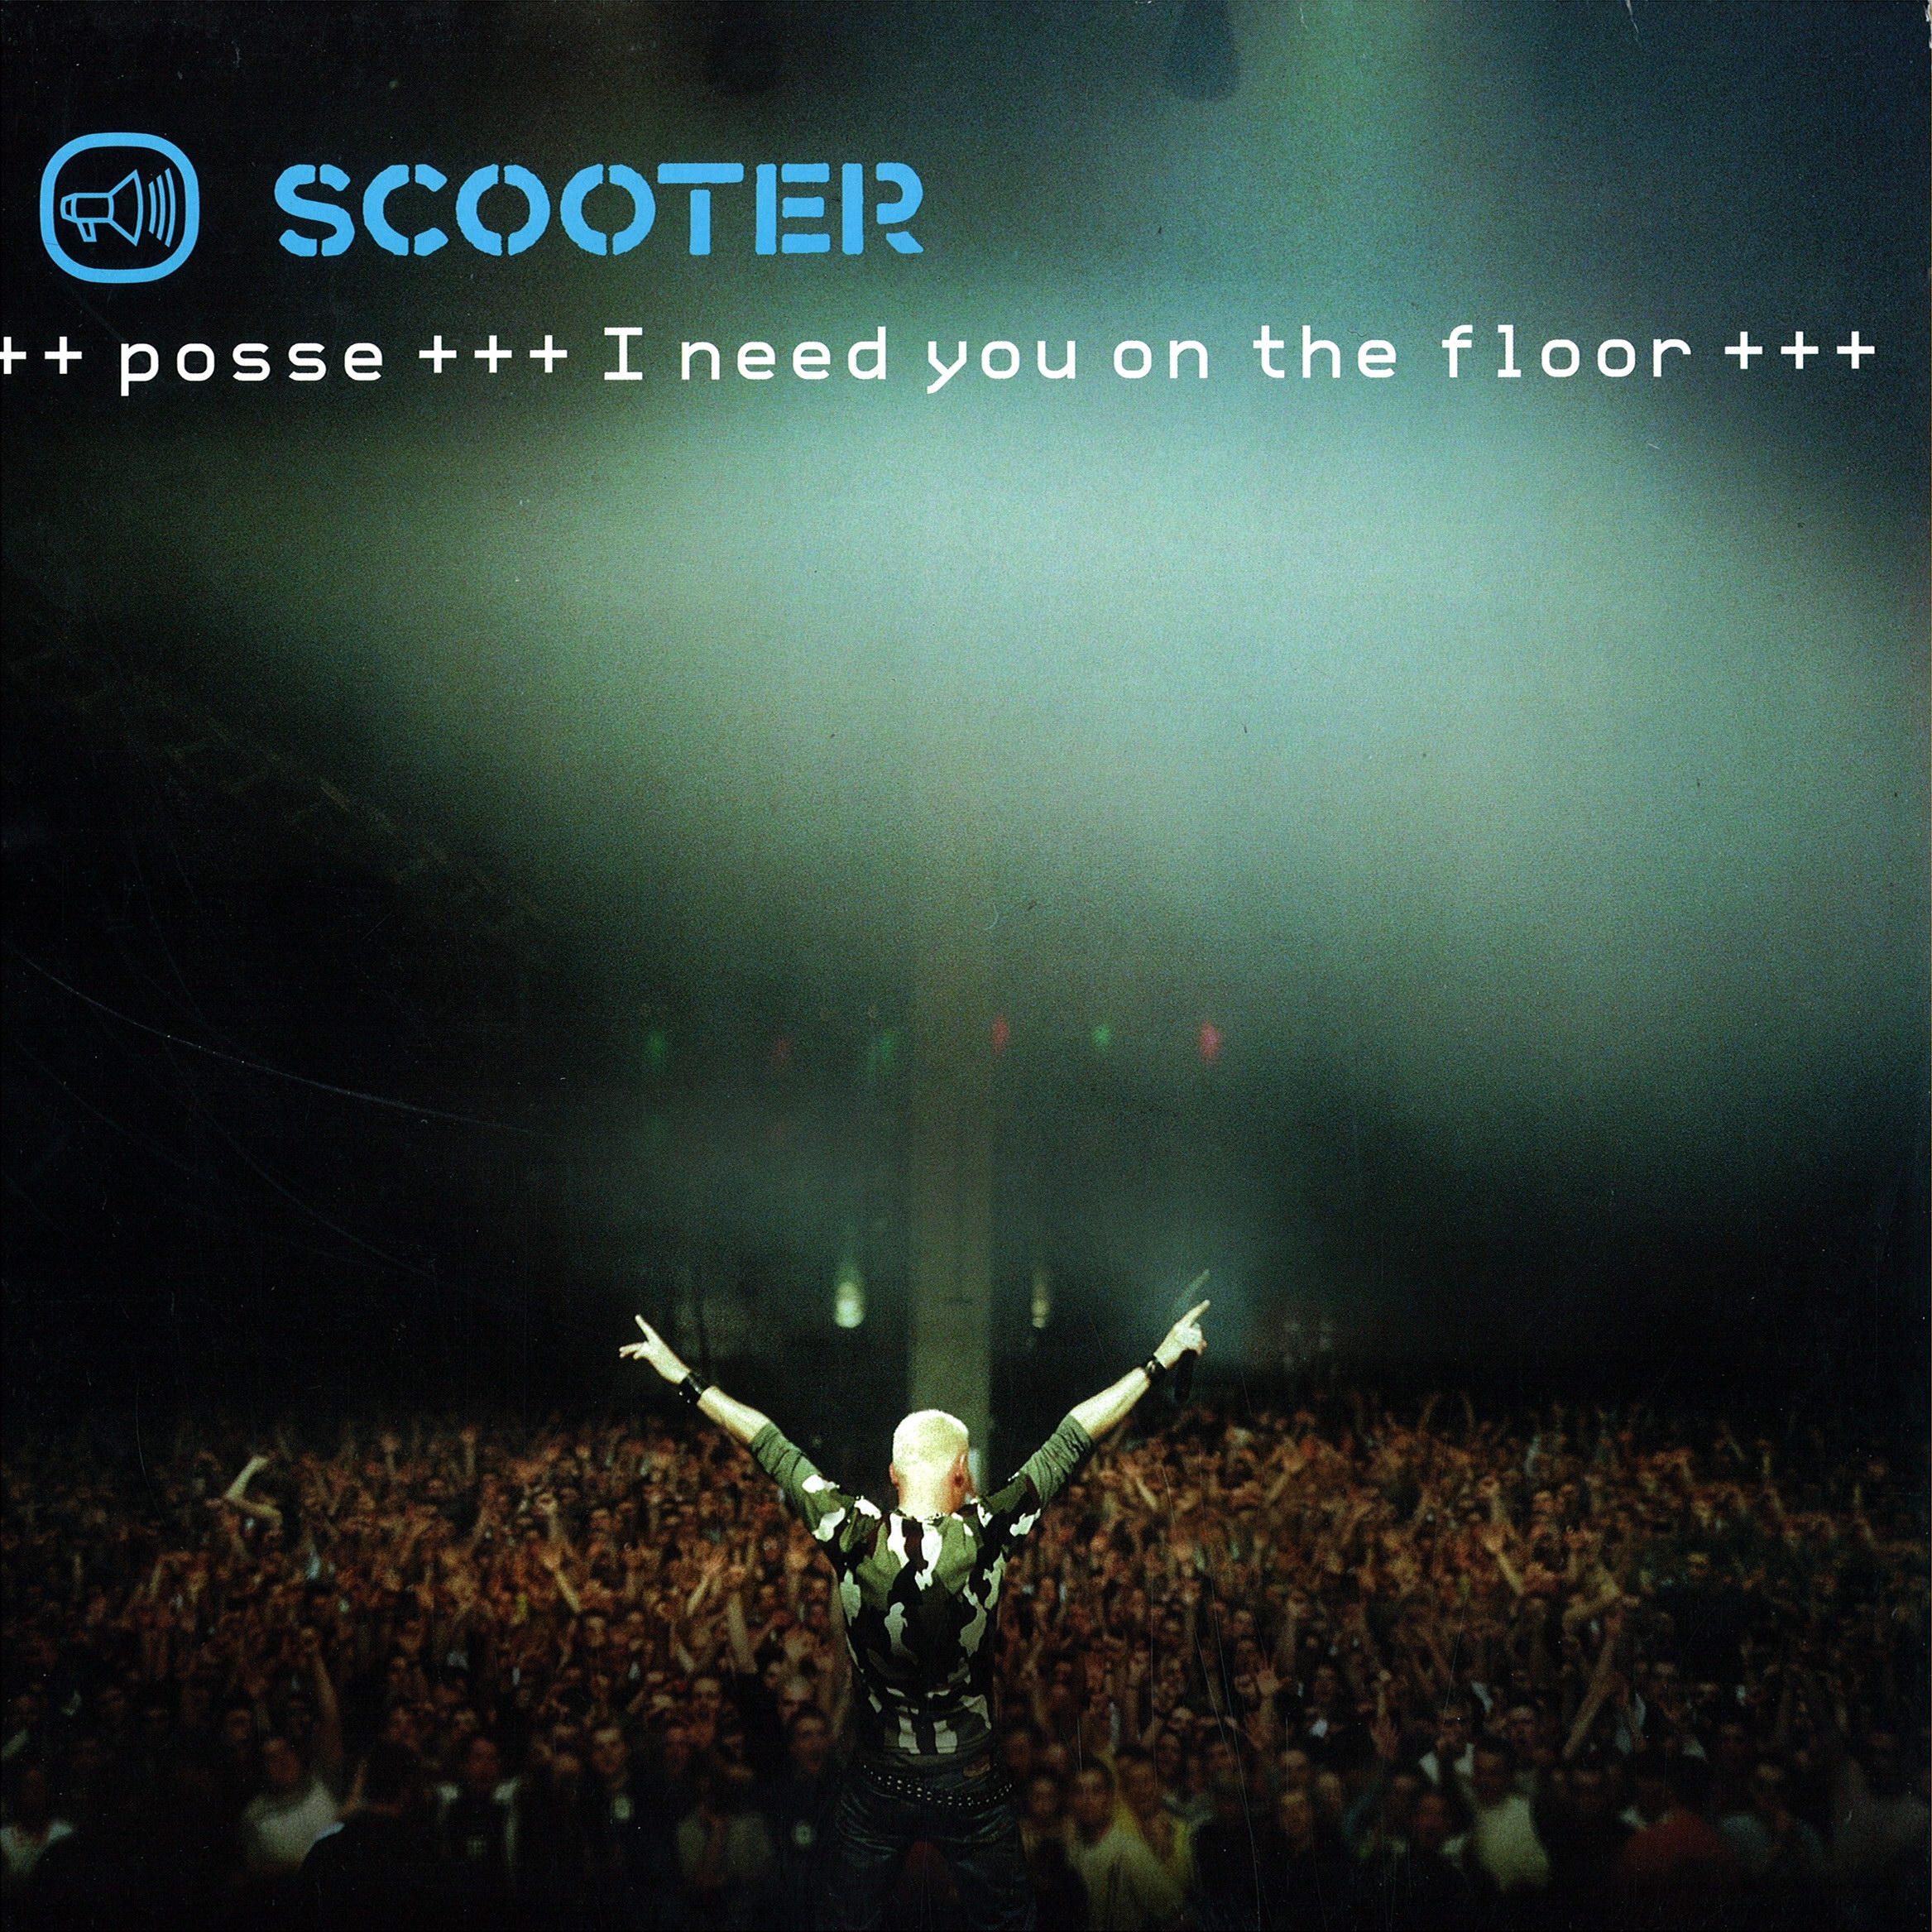 Scooter posse reloaded. Scooter Posse. Scooter Singles. Scooter CD. Scooter Posse i need you on the Floor.